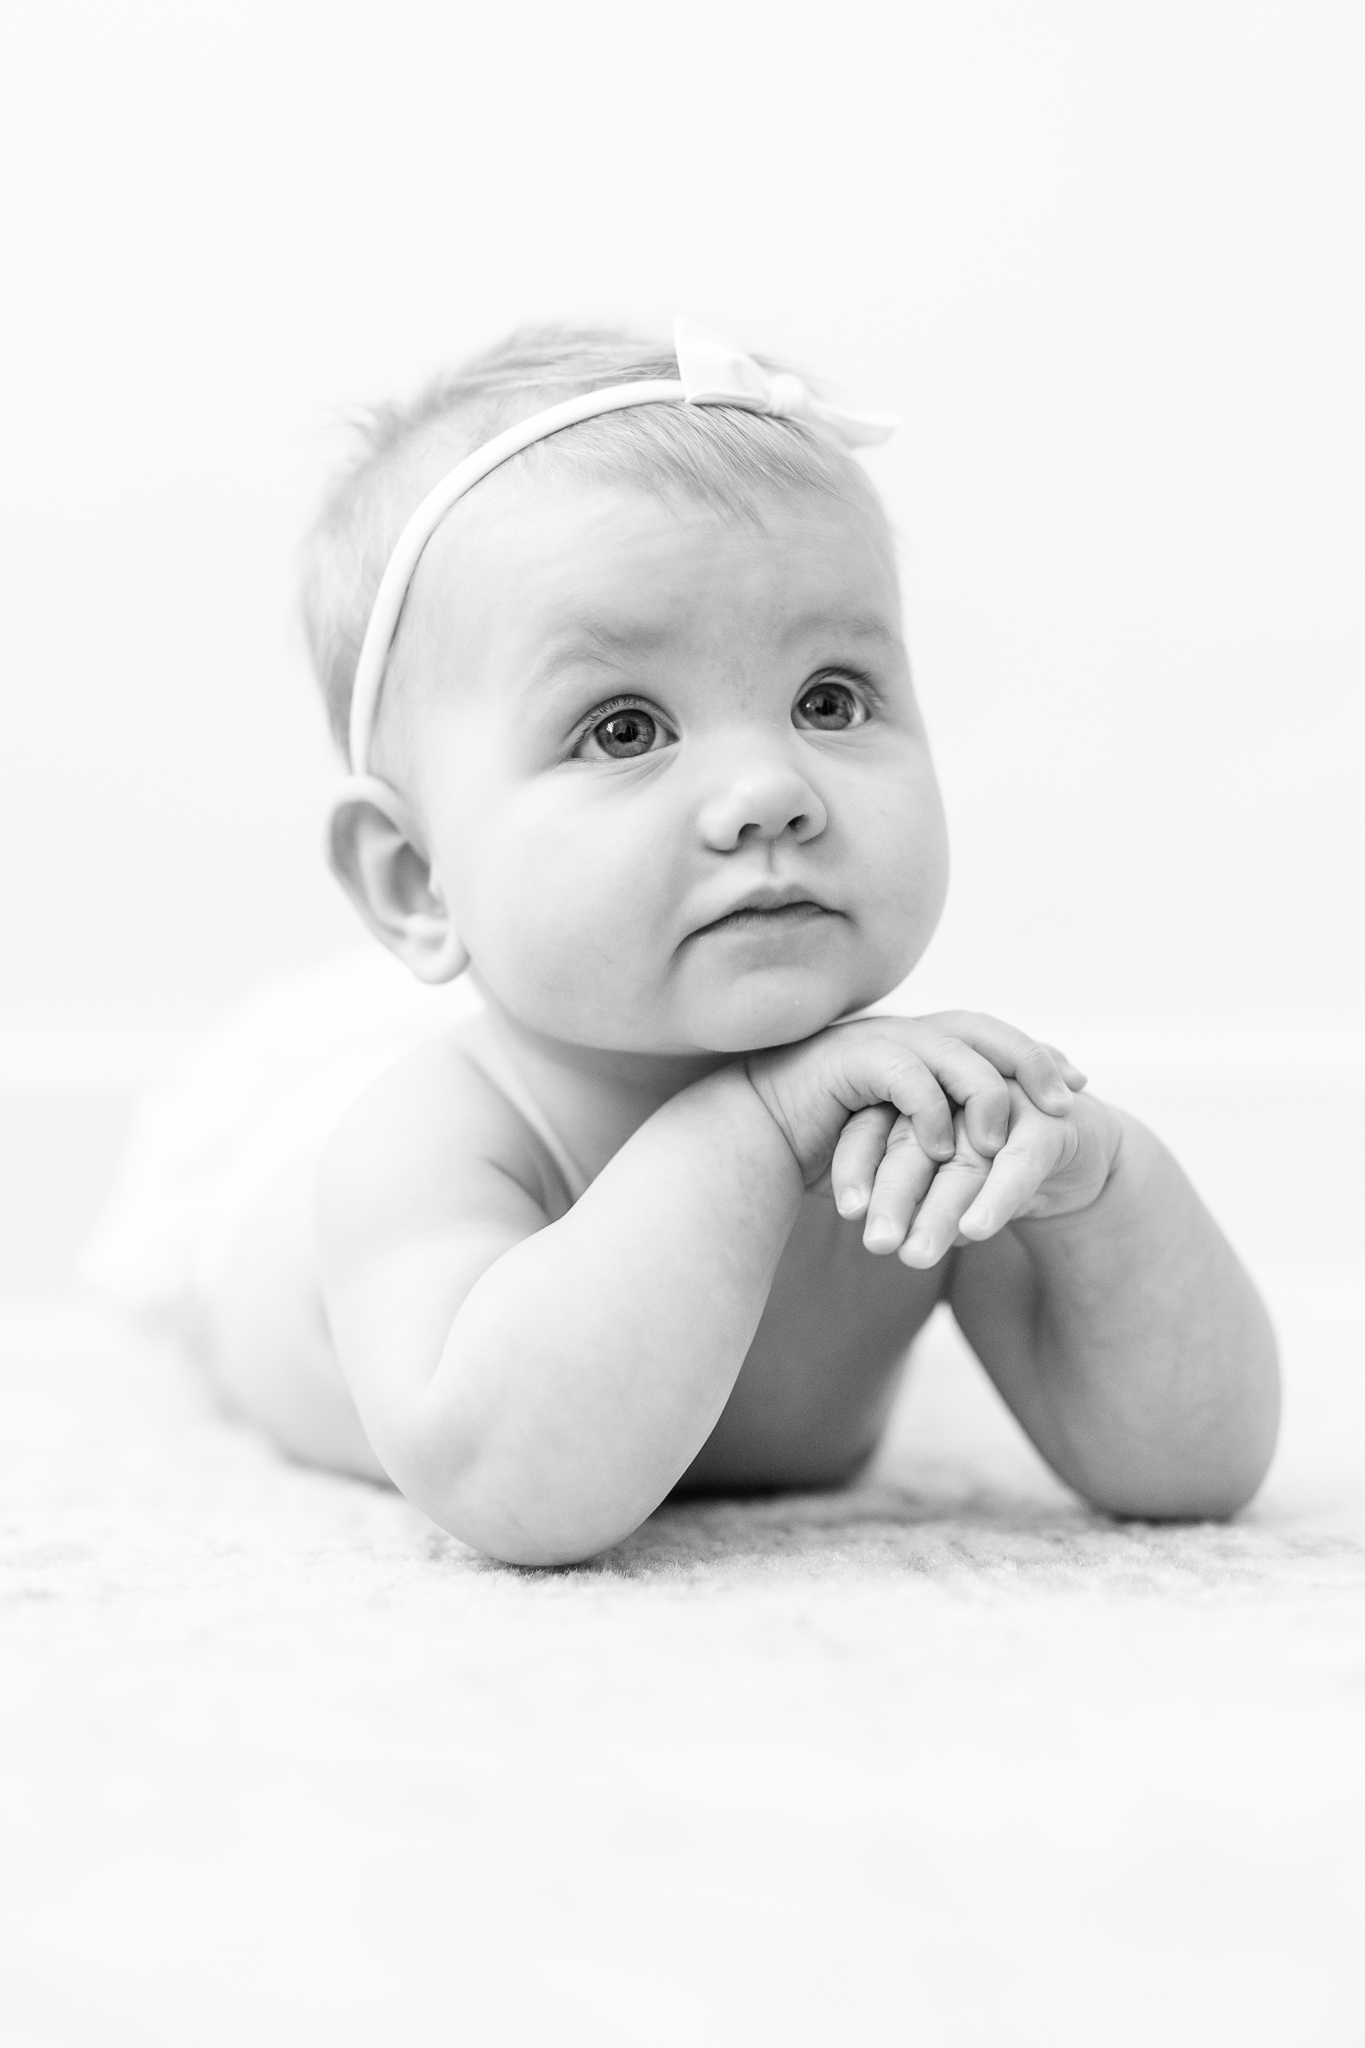 six month old little girl photograph in black and white with baby wearing white bow laying on her tummy with her hands folded under her chin thinking about parenting classes in Columbus